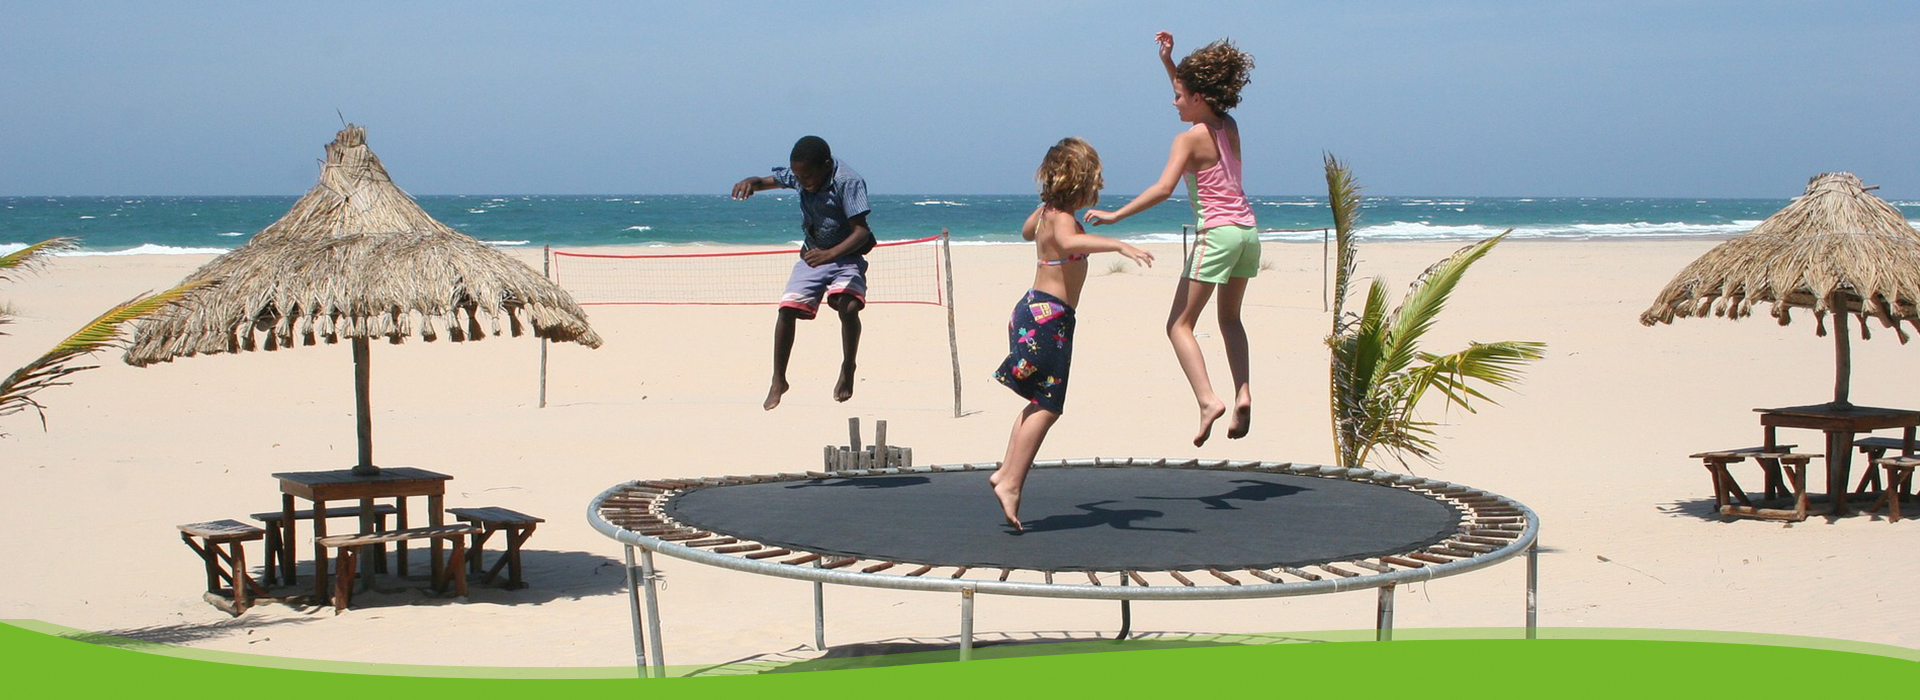 outdoor toys trampoline